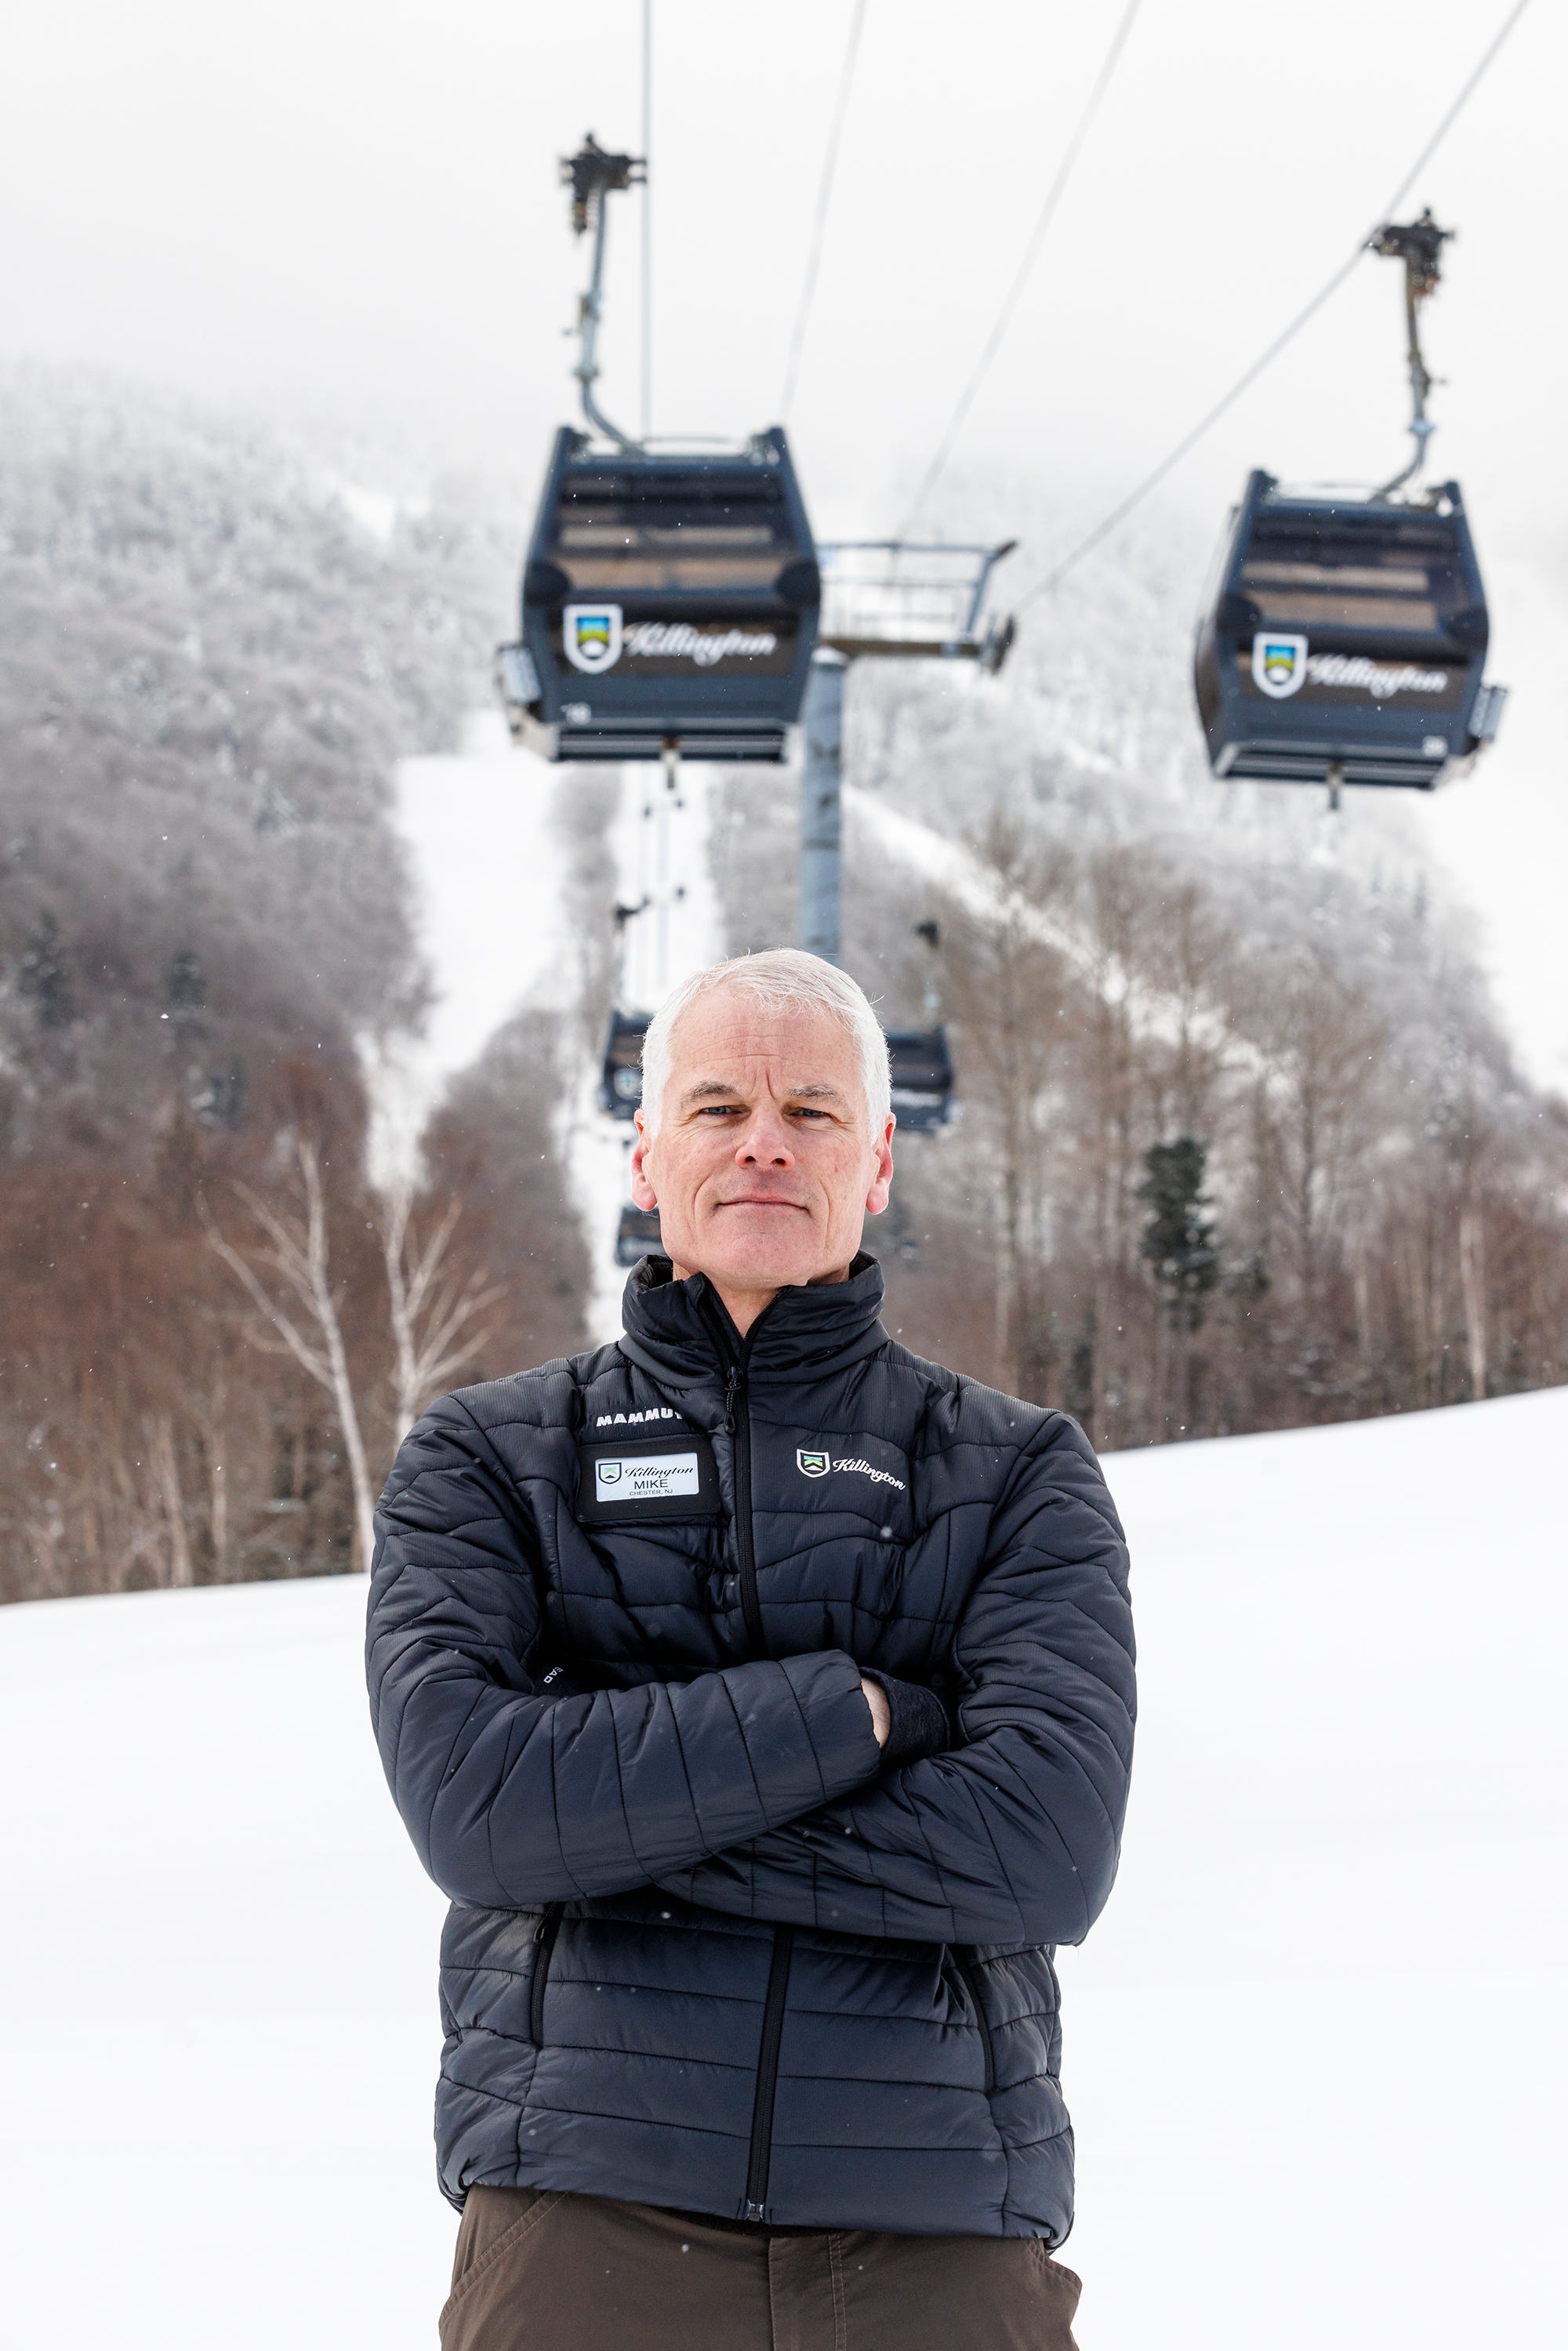 Podcast #143 Killington and Pico President and General Manager Mike Solimano